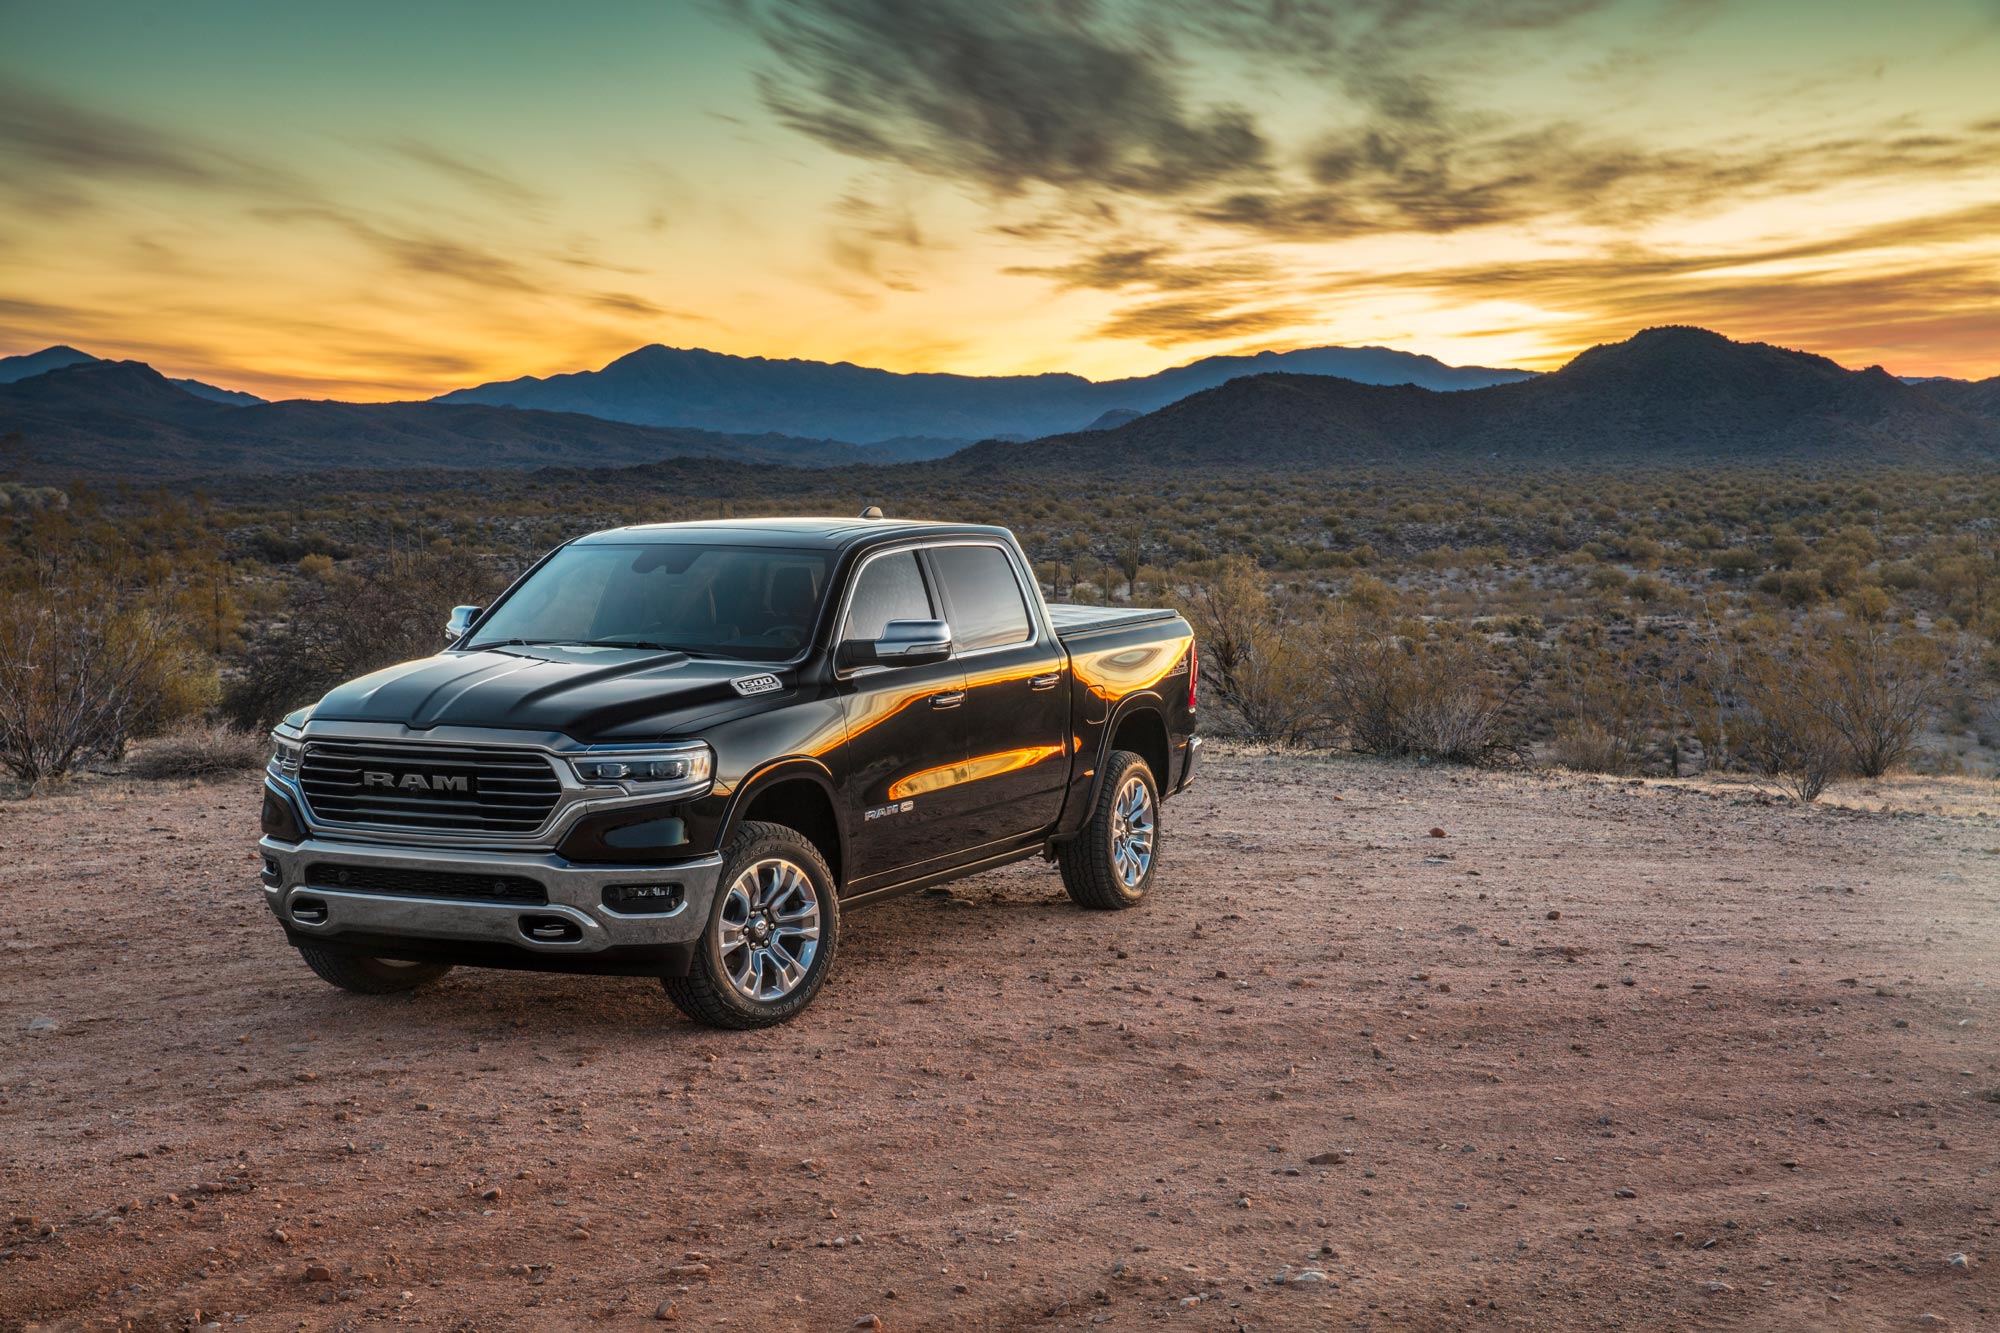 2023 Ram 1500 is parked on a dirt road in the desert at dusk.